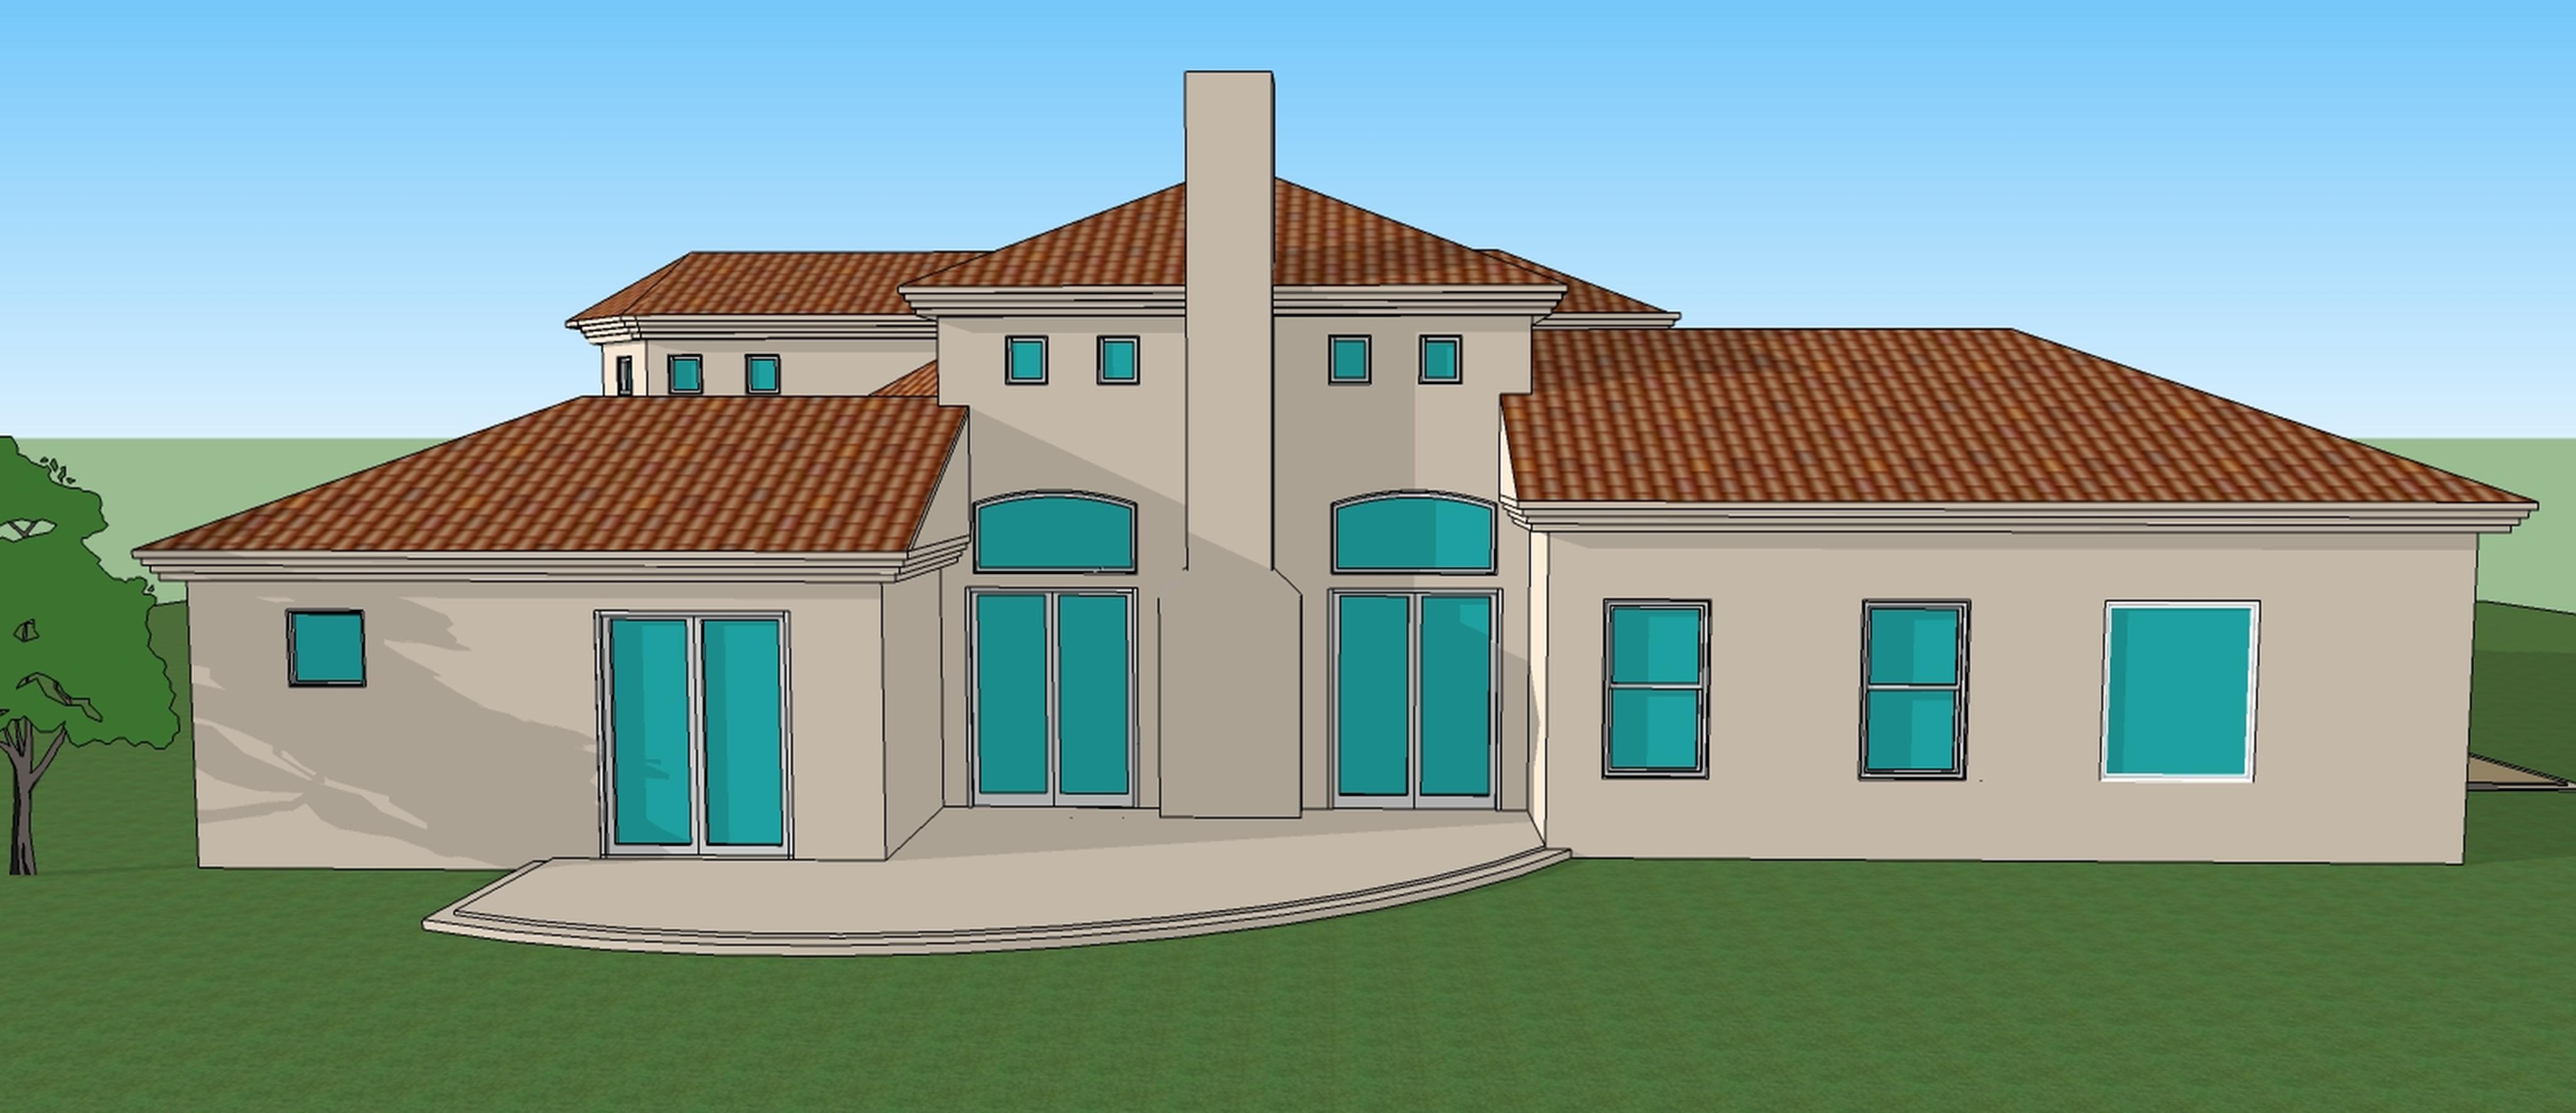 How To Draw 3d House Plan In Autocad - Design Talk